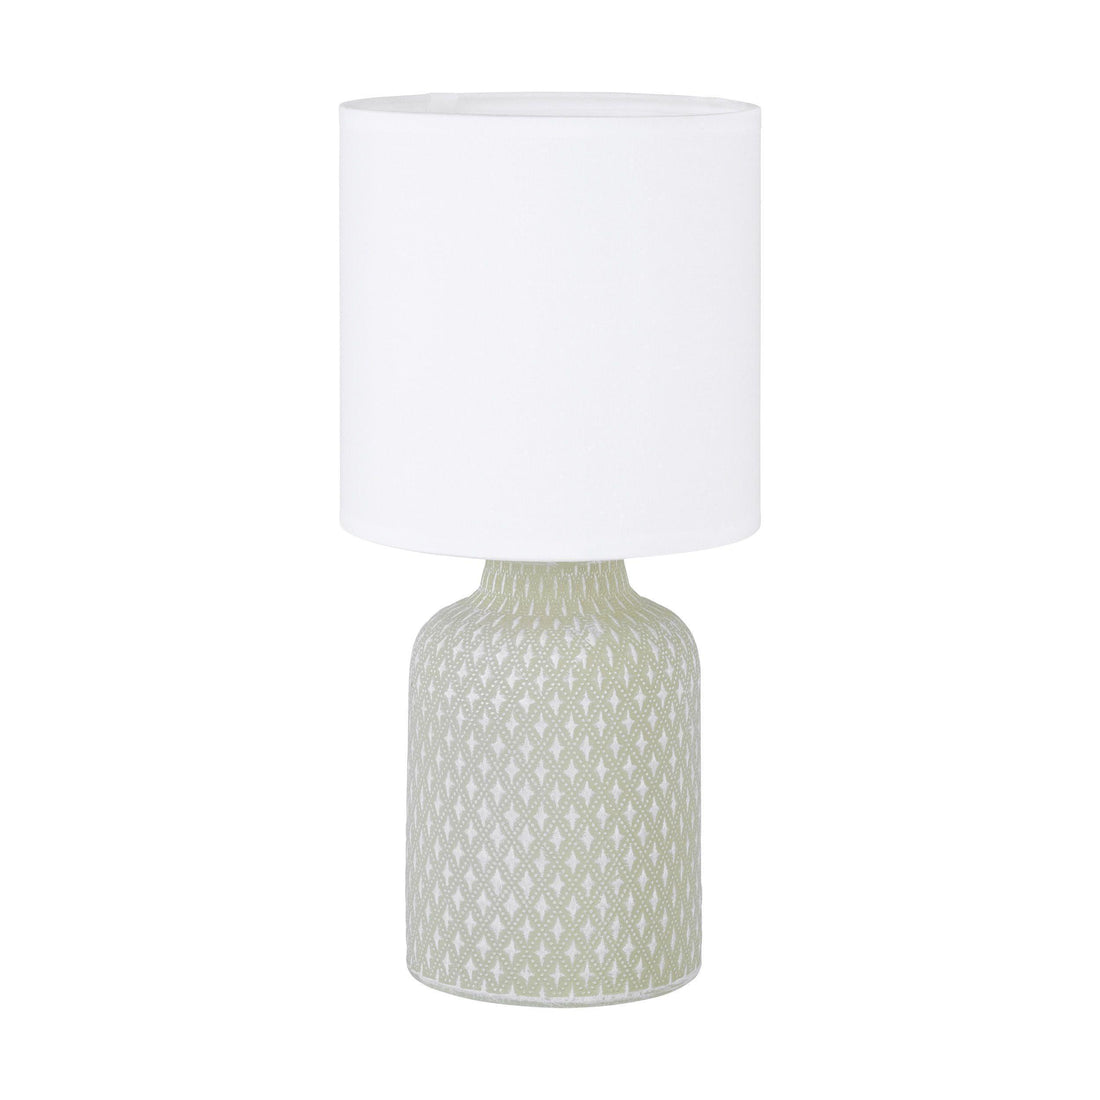 BELLARIVA Table Lamp by The Light Library